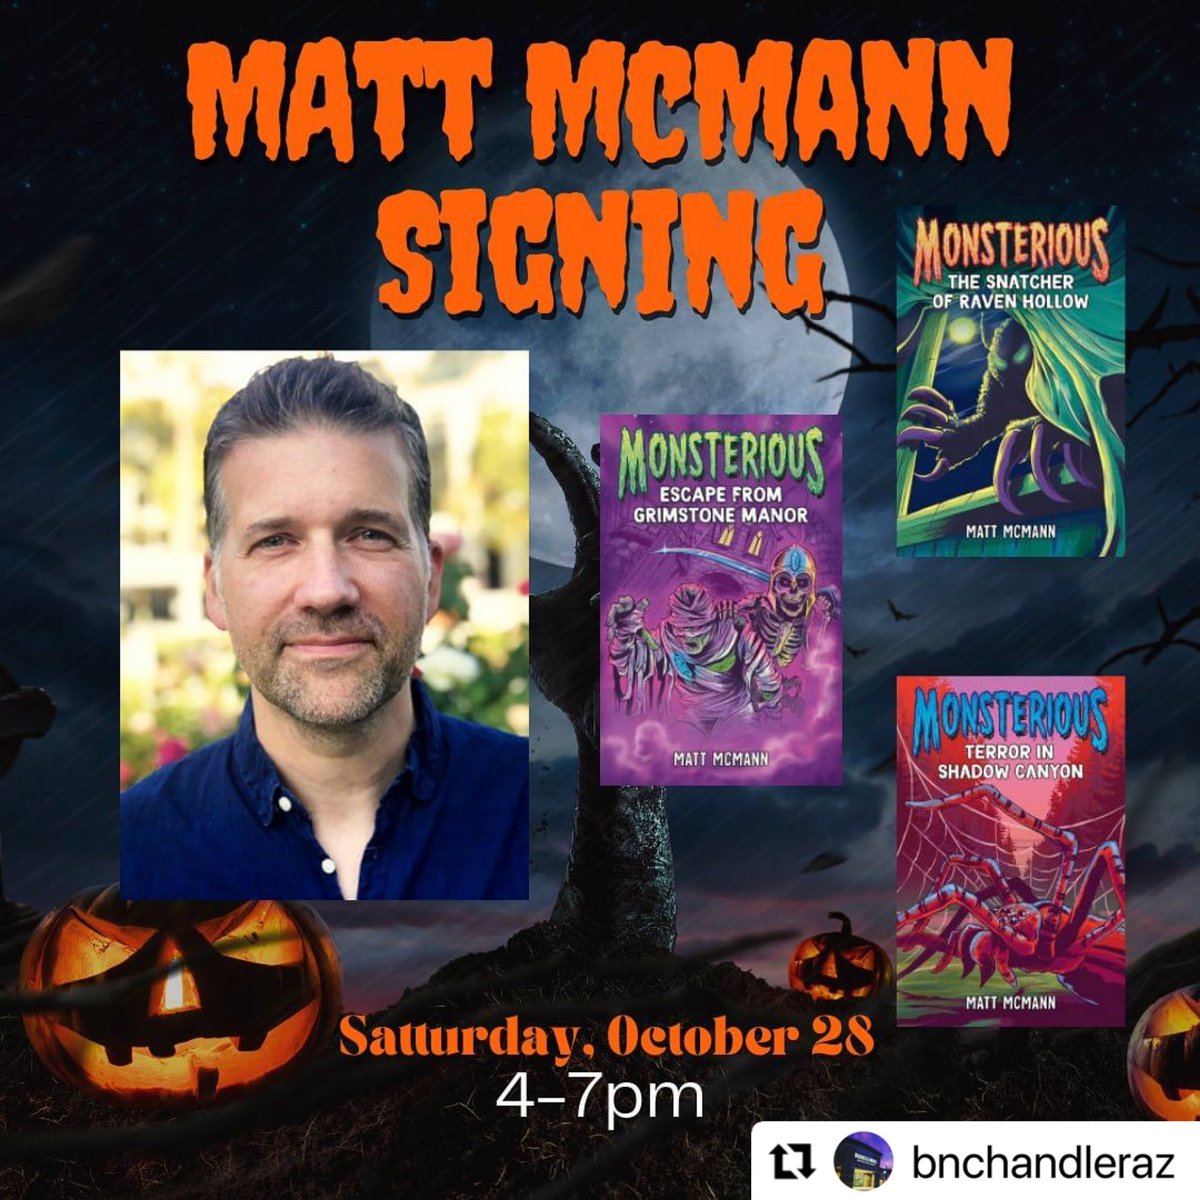 TODAY! I’d love to see you at Barnes & Noble Chandler Mall AZ for spooky family fun anytime 4:00-7:00. Personalized books, Q&A, prizes, photos. @bnChandlerAZ @penguinkids